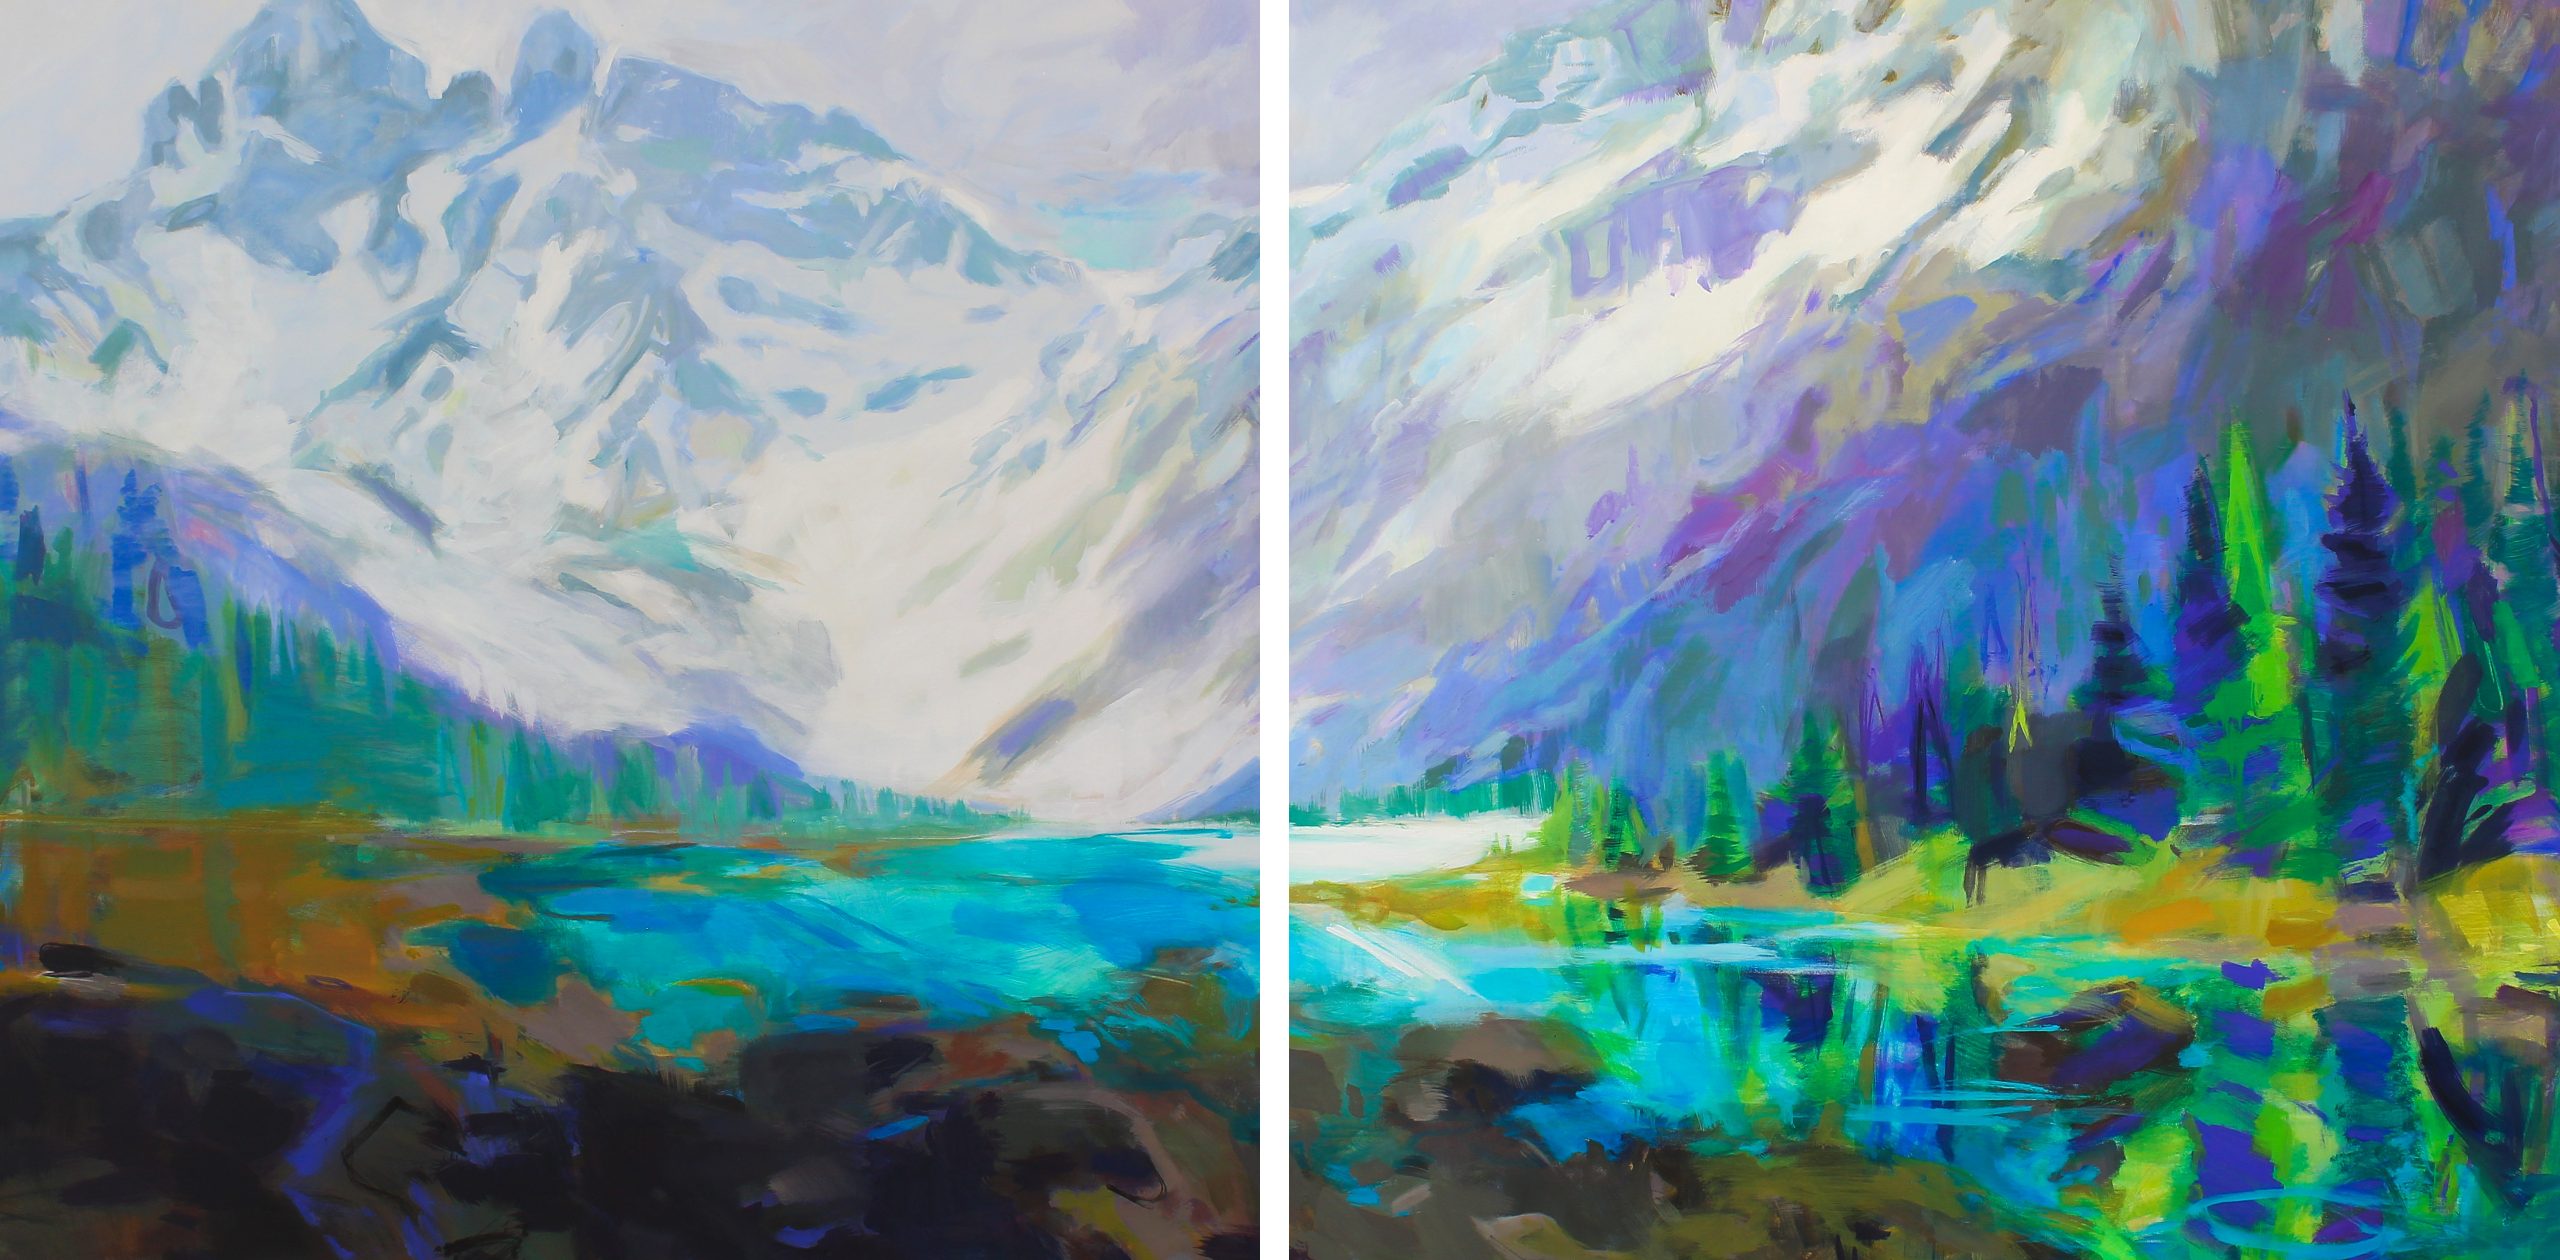 Twins, acrylic landscape painting by Becky Holuk | Effusion Art Gallery + Cast Glass Studio, Invermere BC